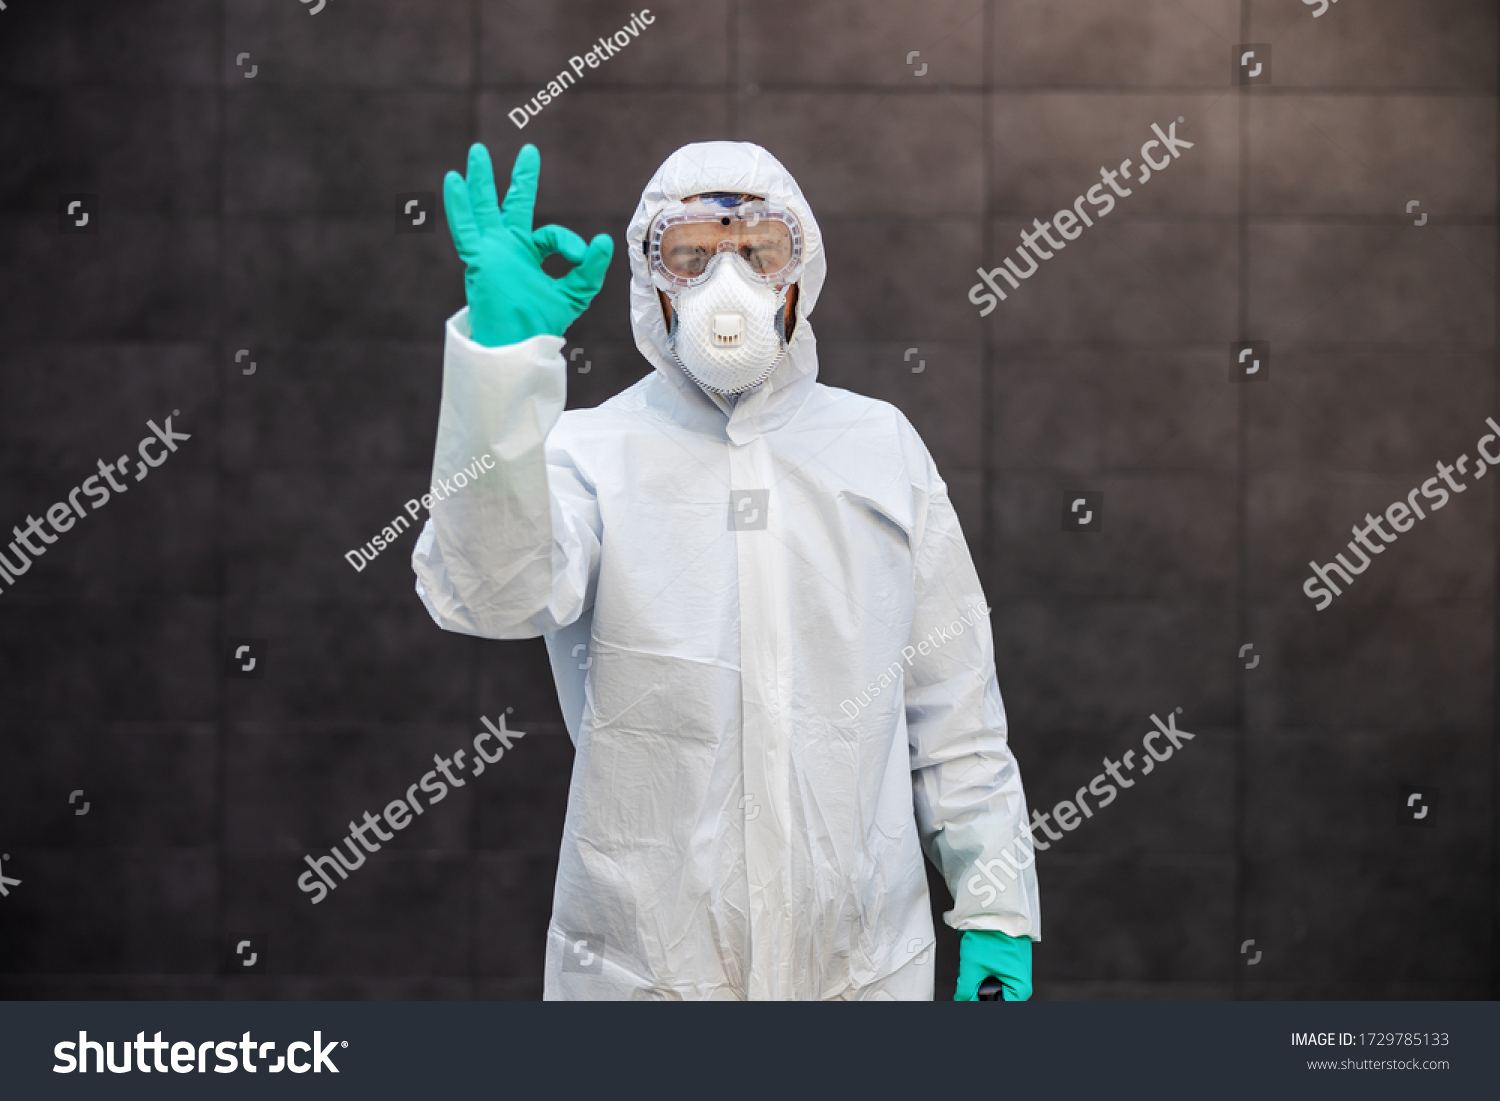 Portrait of man in sterile uniform and mask standing outdoors and showing okay sign. Surfaces are all sterilized from corona virus/ covid-19. #1729785133